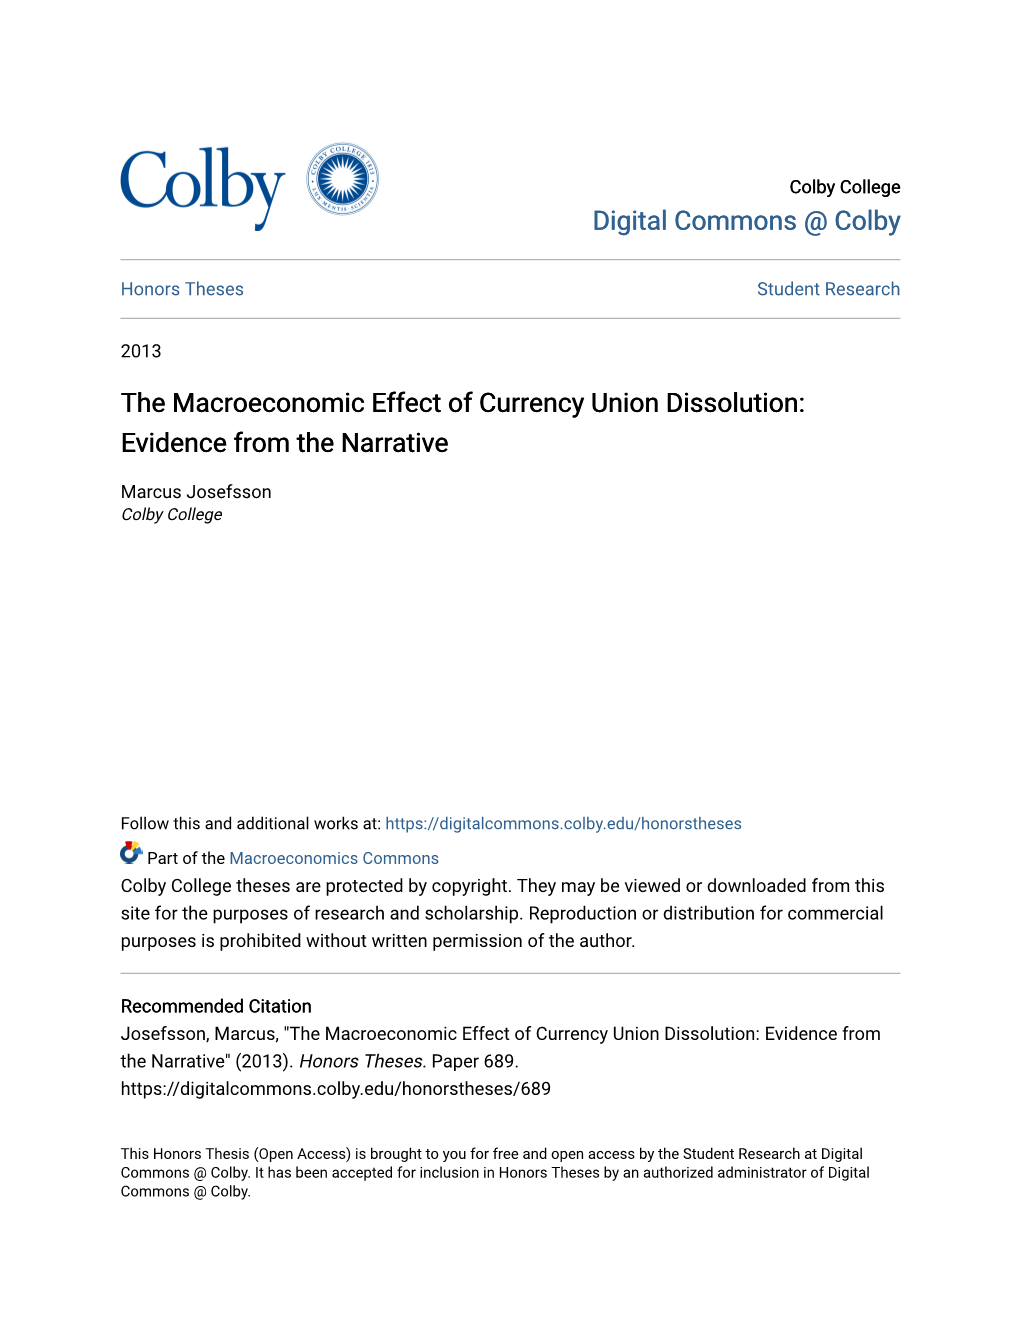 The Macroeconomic Effect of Currency Union Dissolution: Evidence from the Narrative